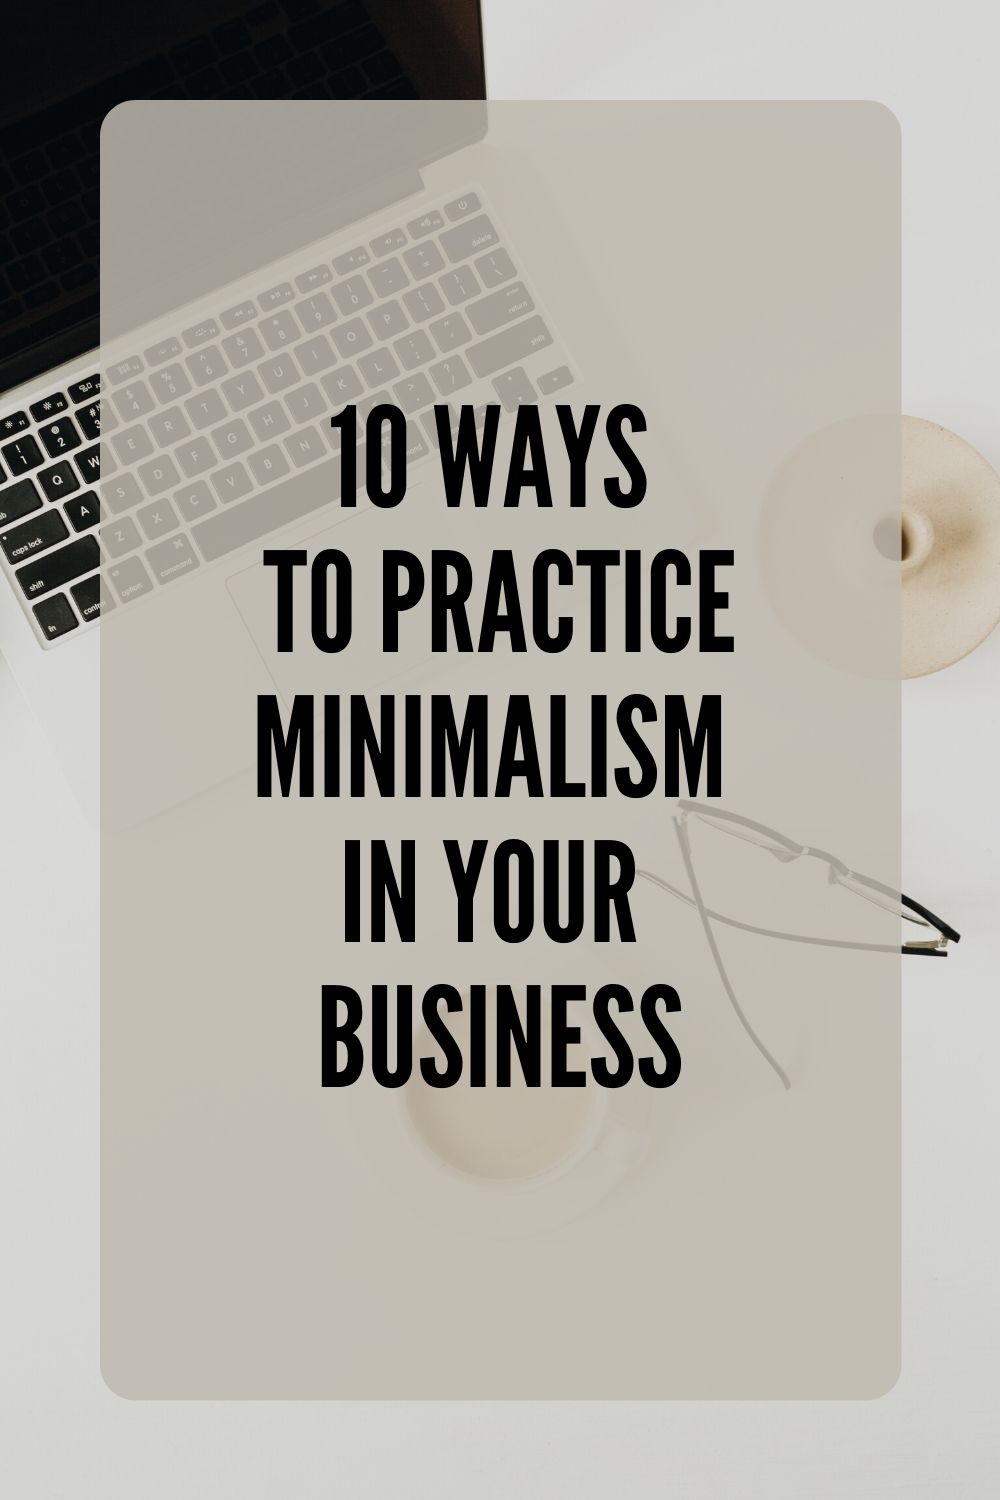 10 Ways to Practice Minimalism in Your Business